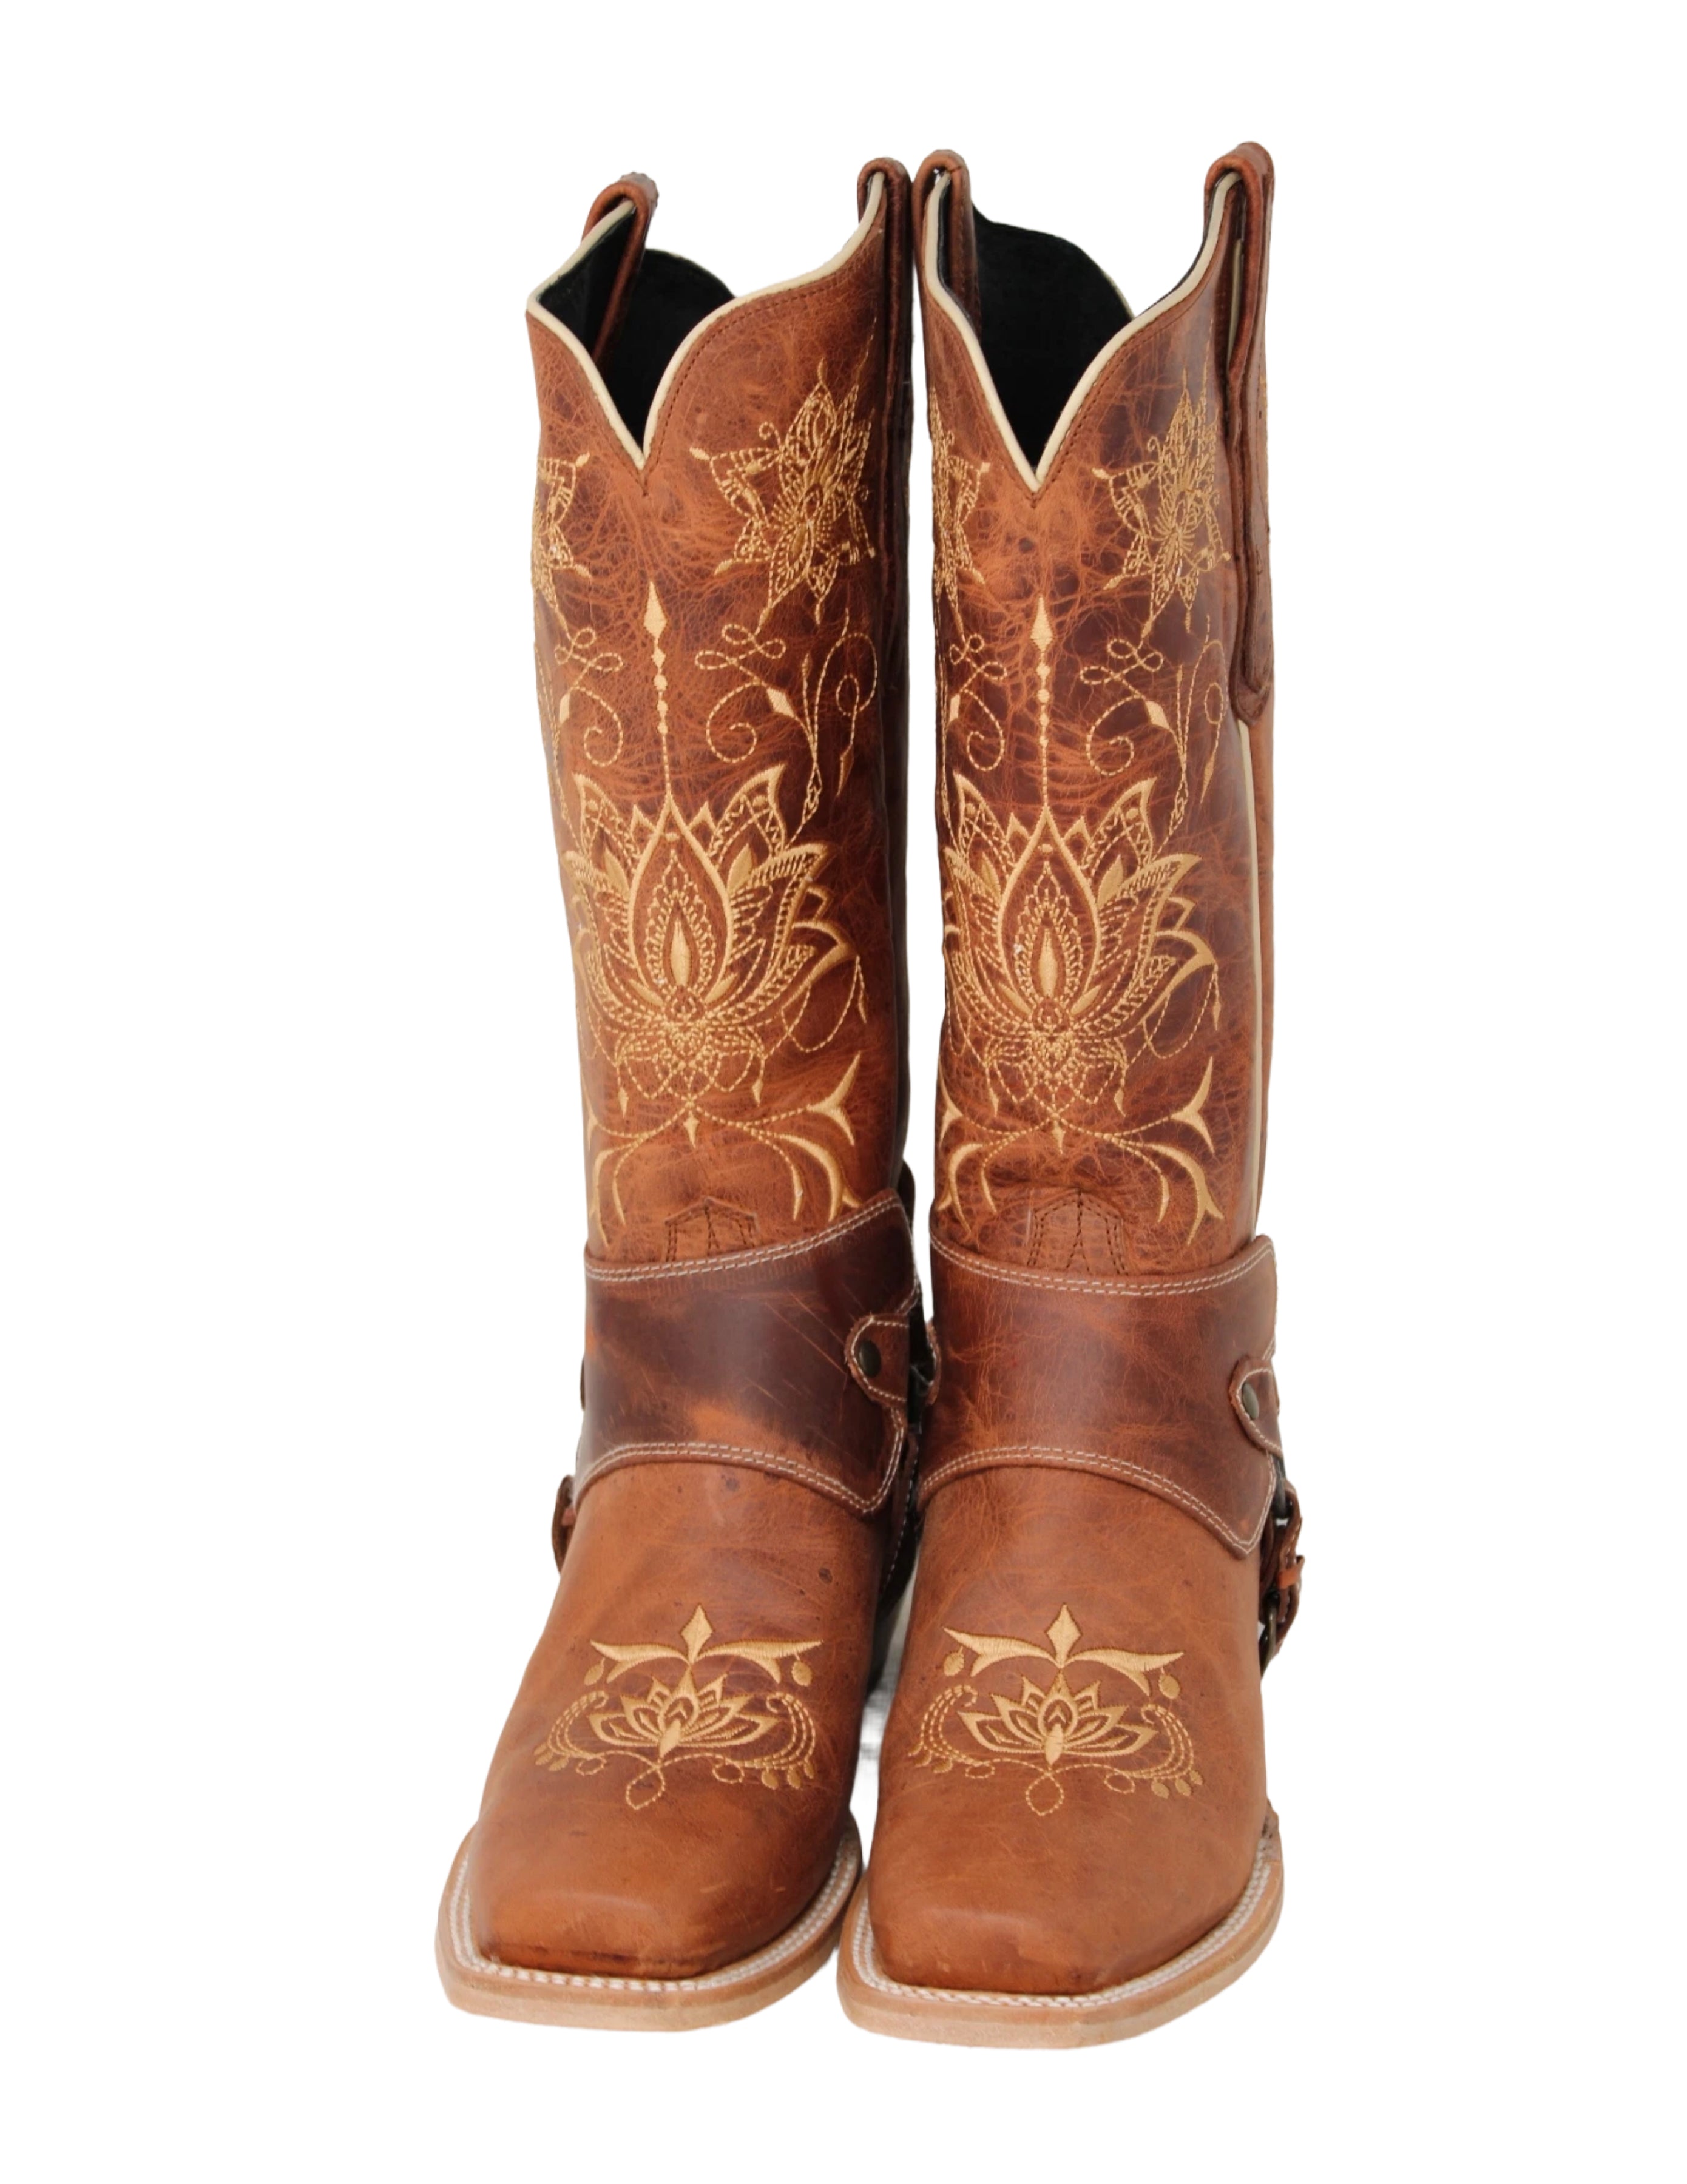 Kelly Lotus Flower Cowgirl Boots